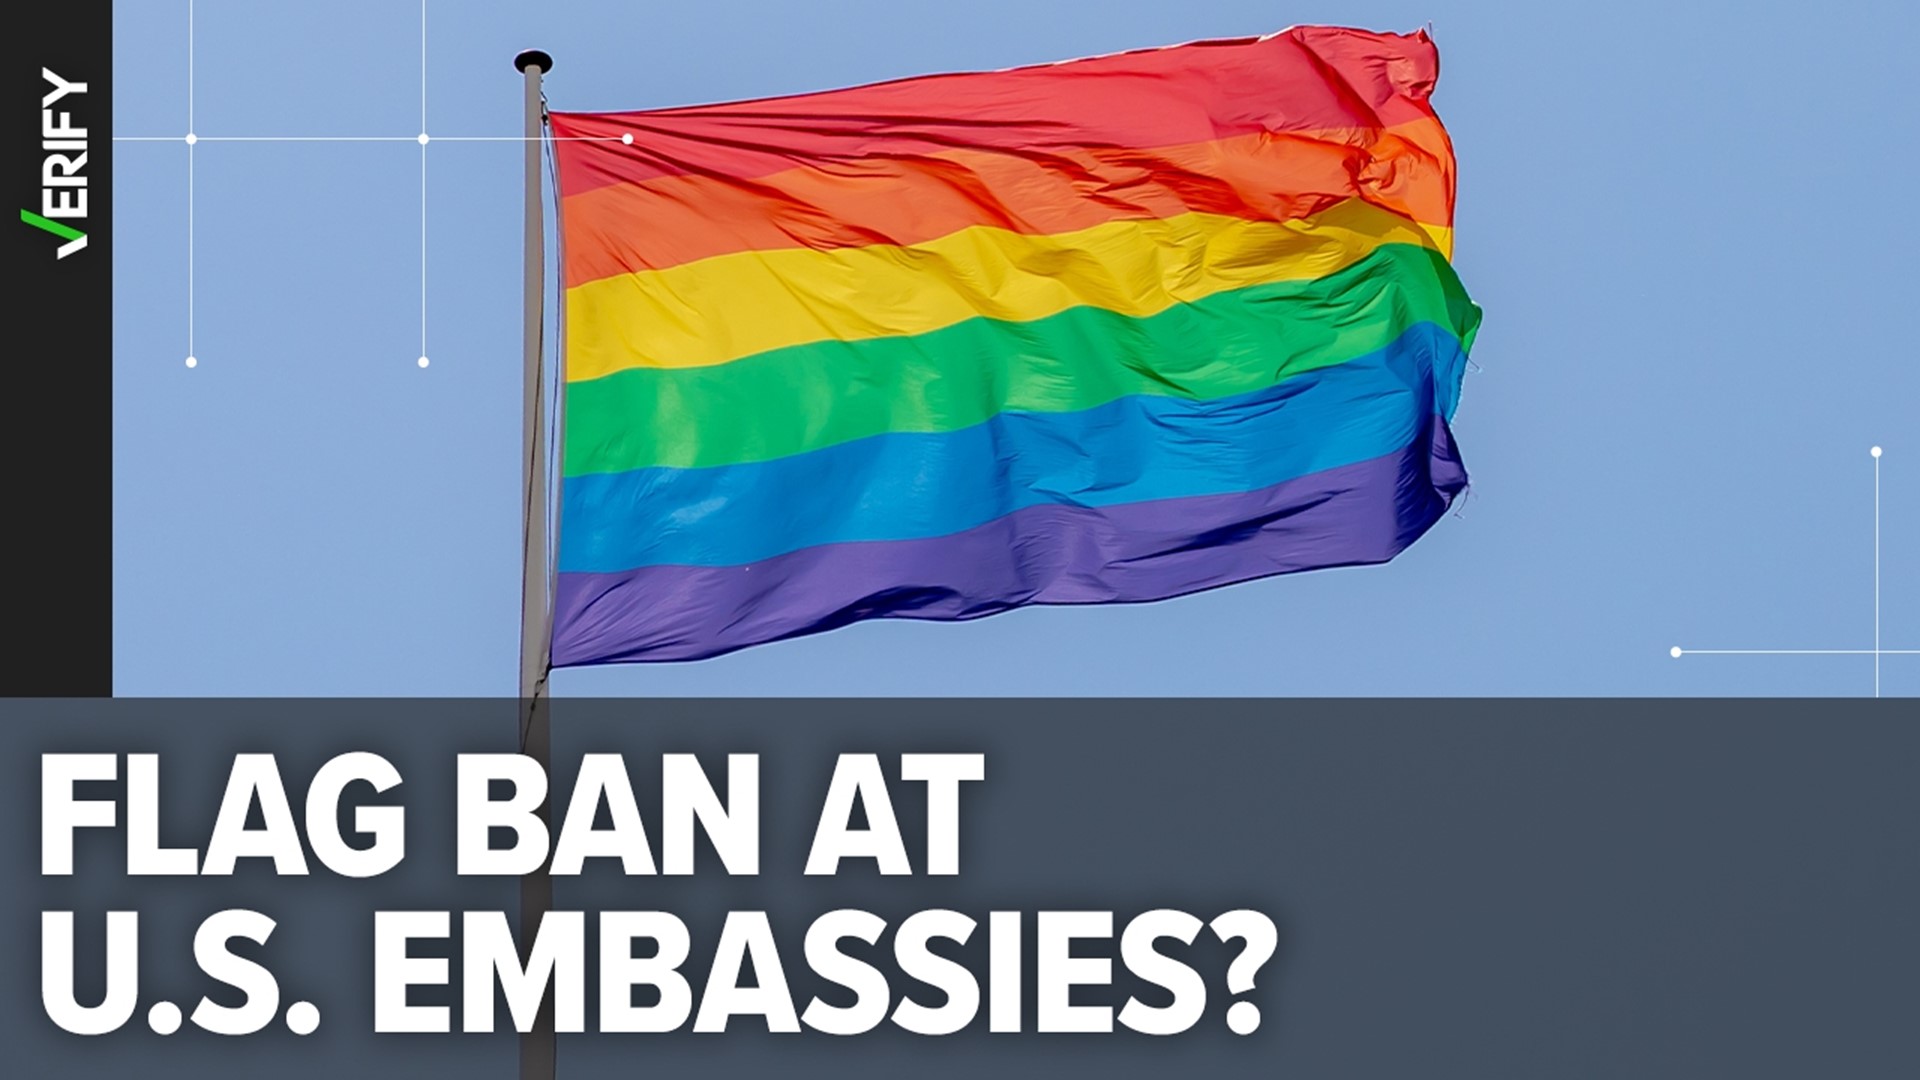 The federal government’s $1.2 trillion spending package bans U.S. embassies from flying pride flags, but it doesn’t limit other pride flag displays.